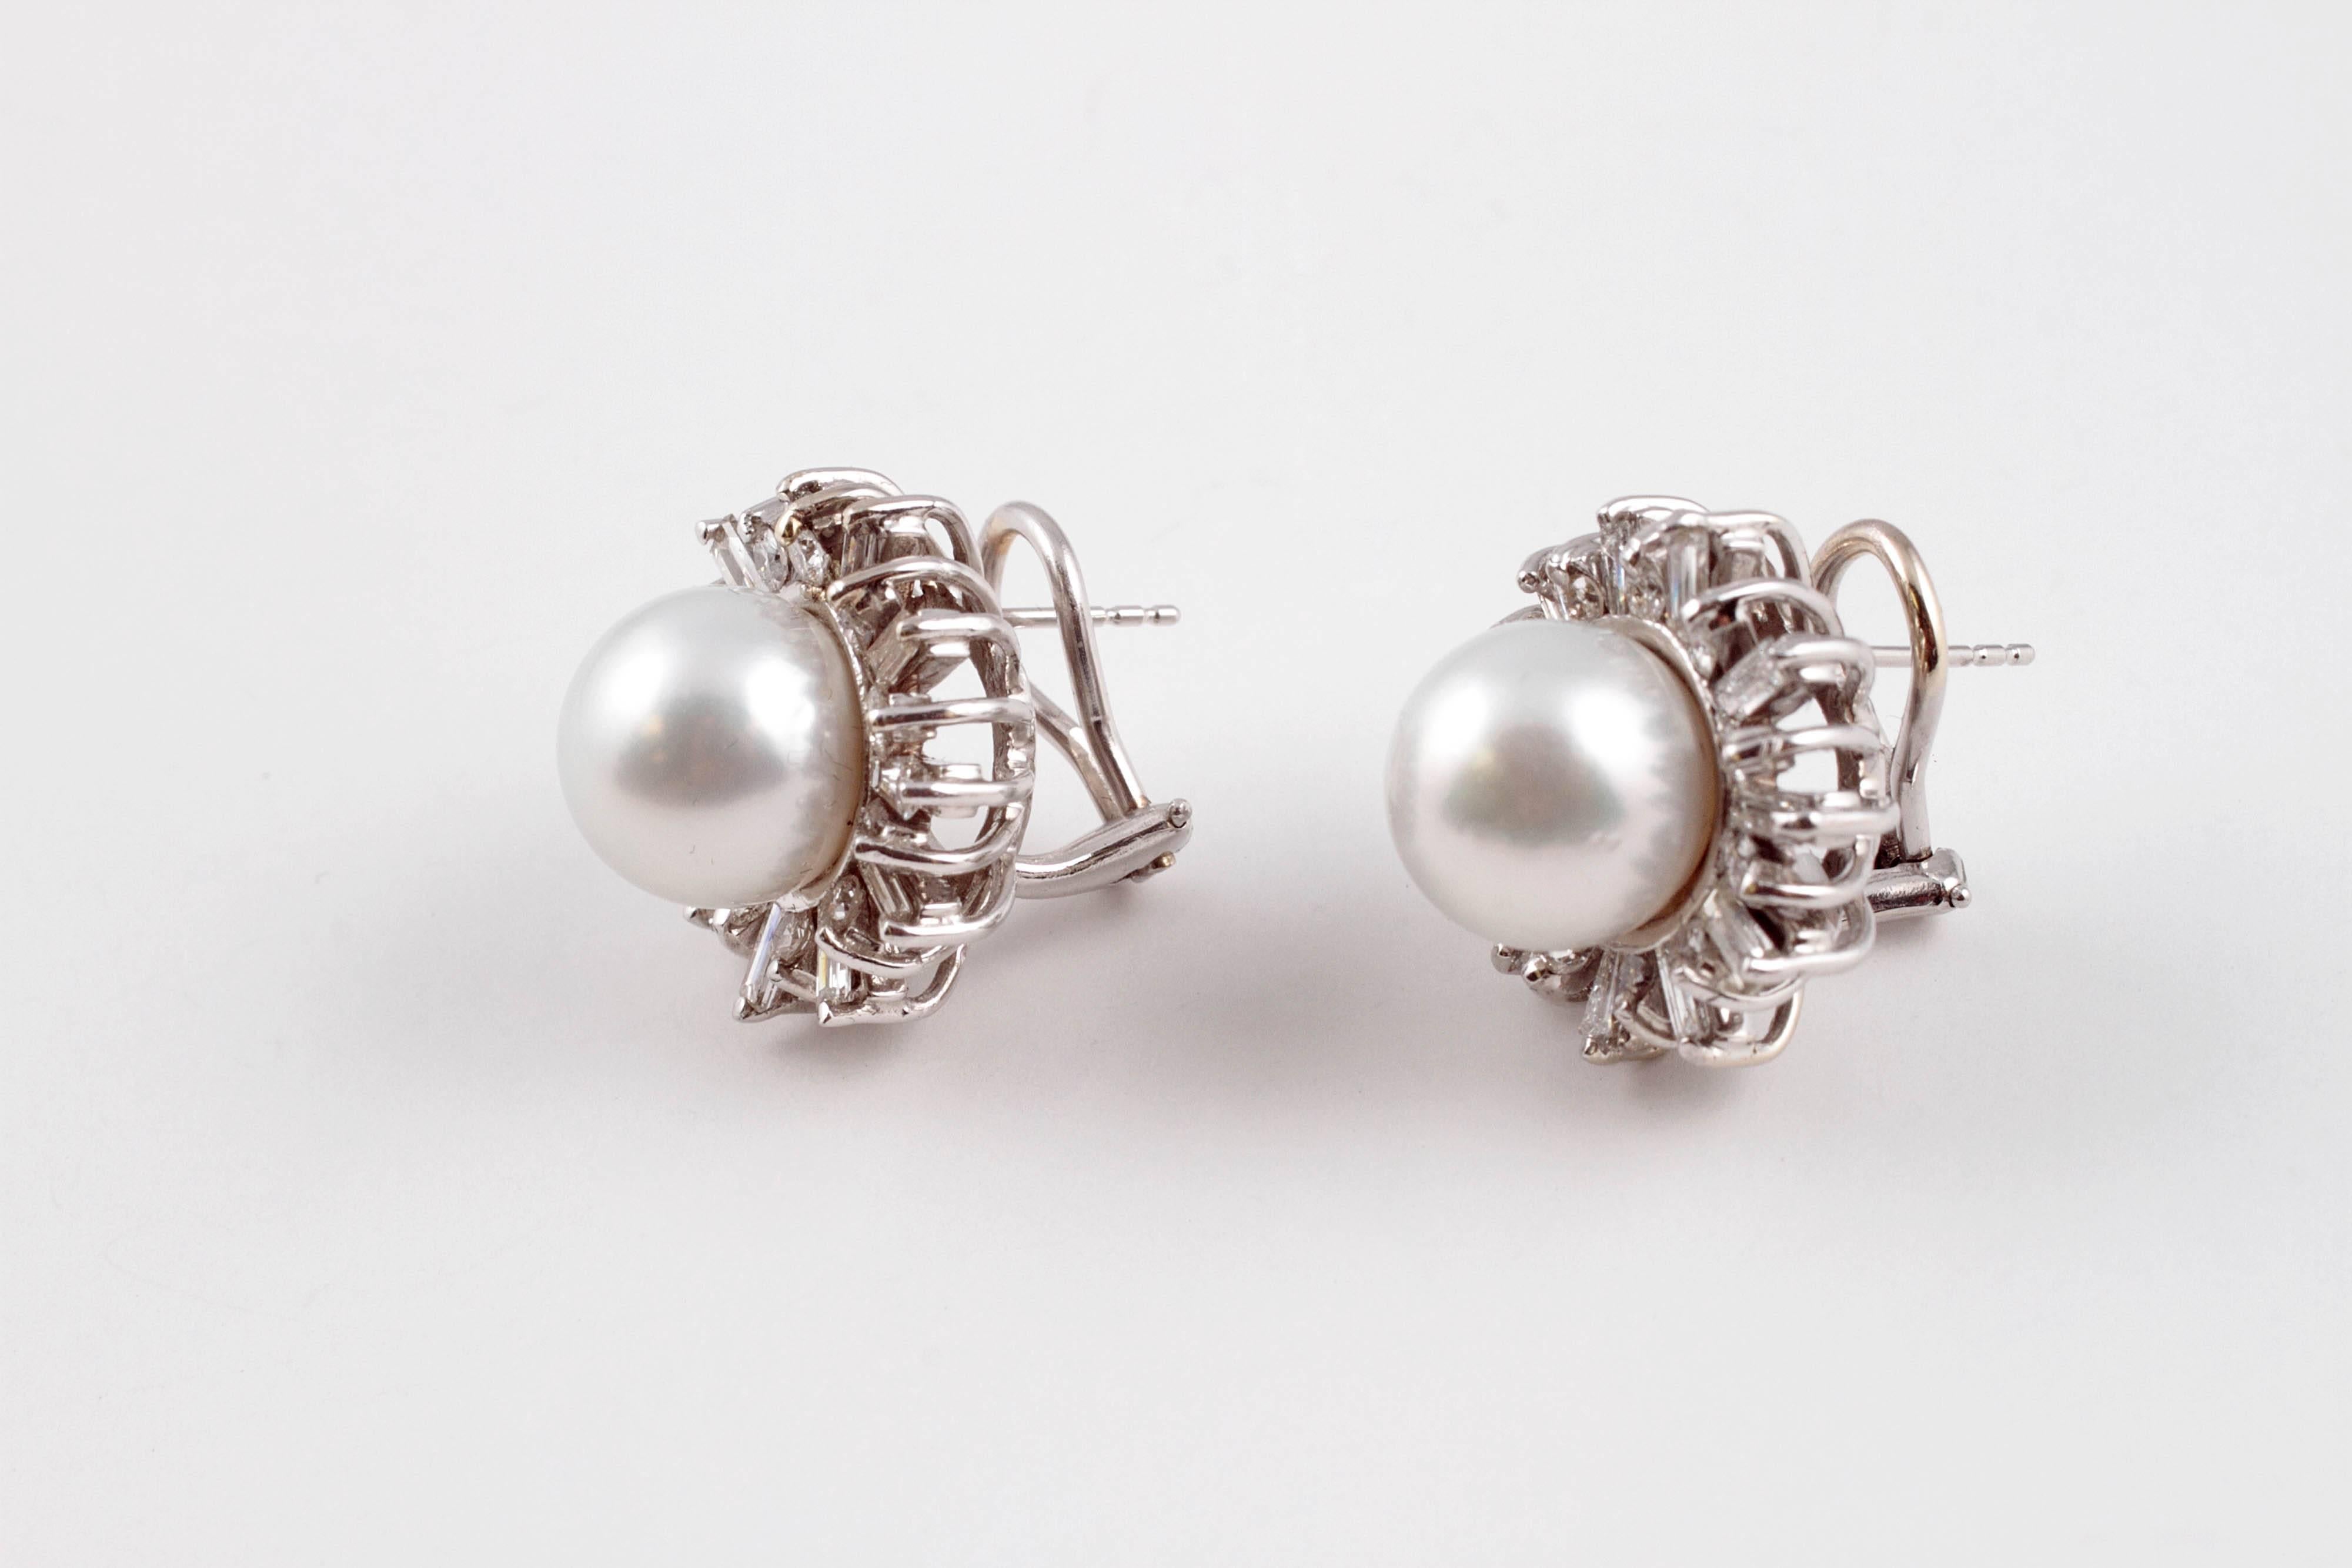 Lustrous 11.35 millimeter South Sea pearls with 3.05 carats of diamonds in 14 karat white gold earrings.